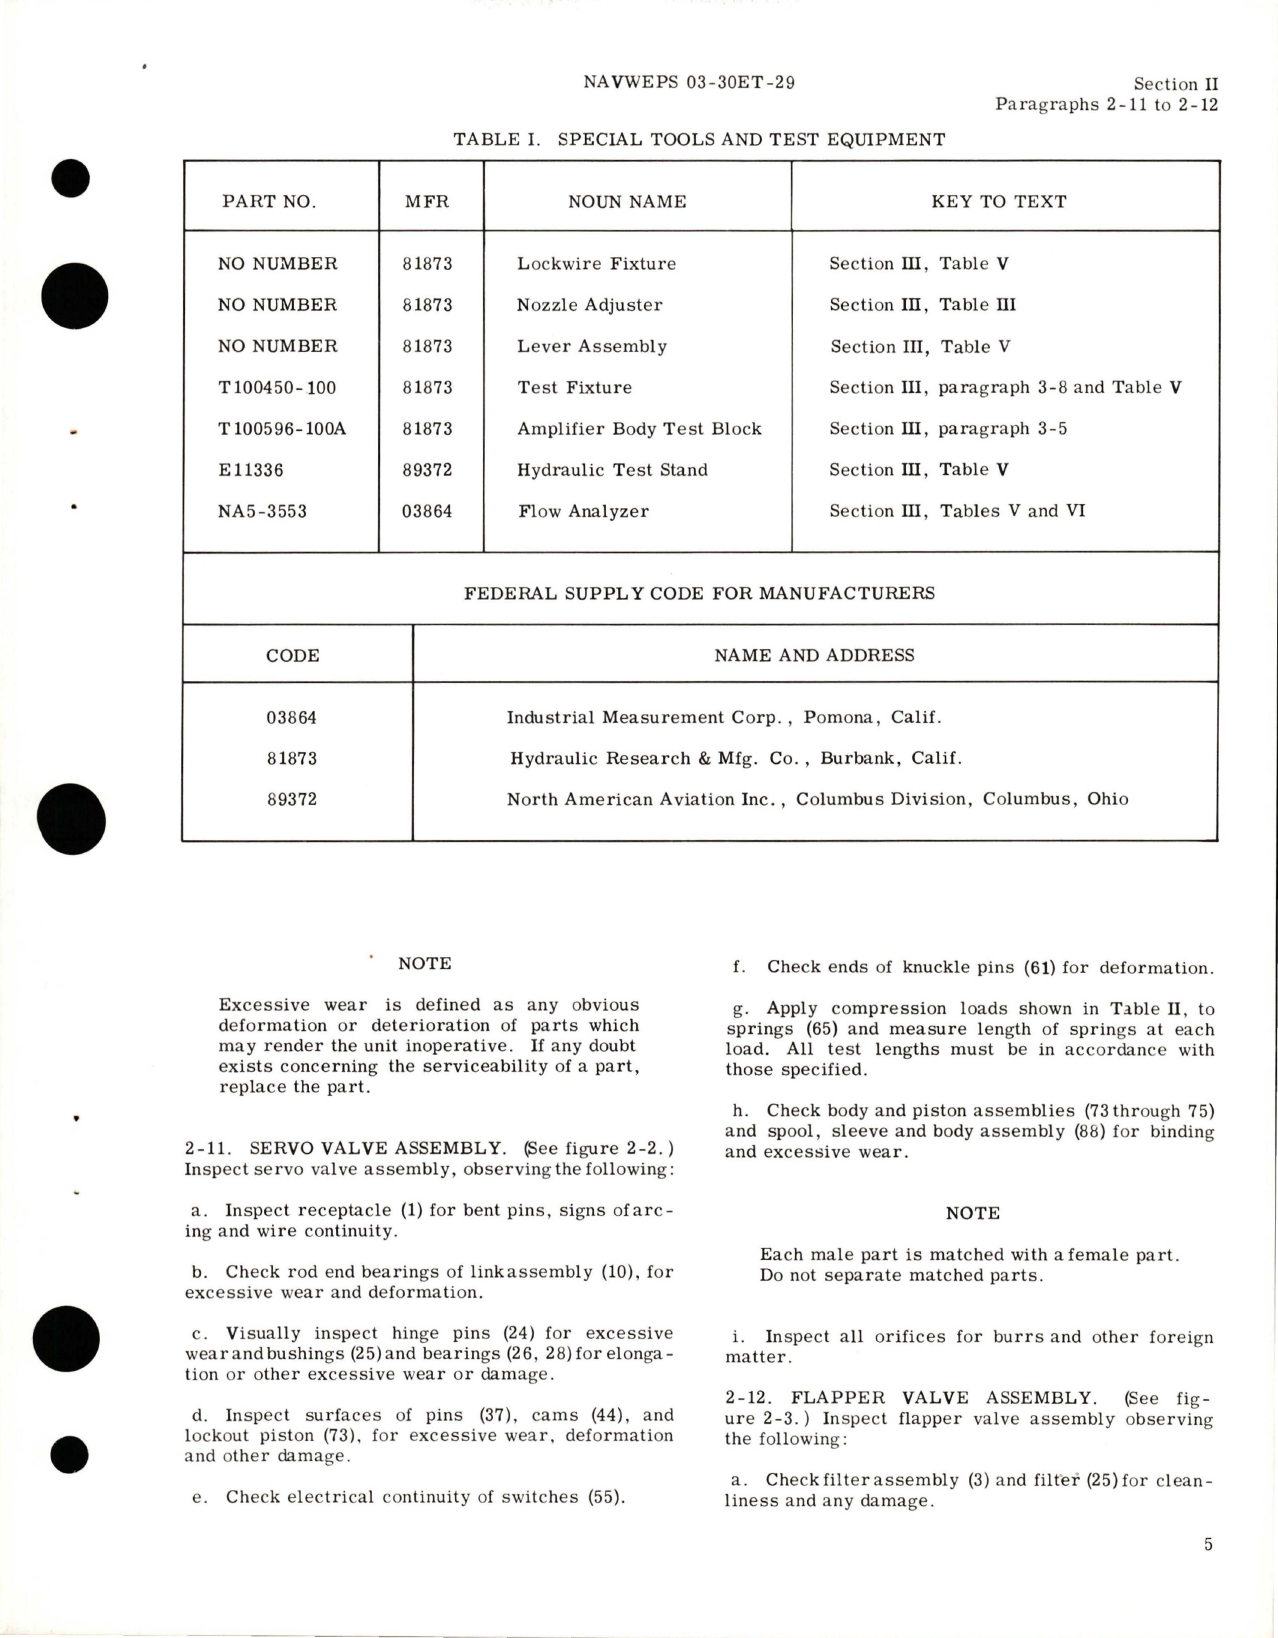 Sample page 9 from AirCorps Library document: Overhaul Instructions for Hydraulic Servo Valve Assembly - Part 100450 